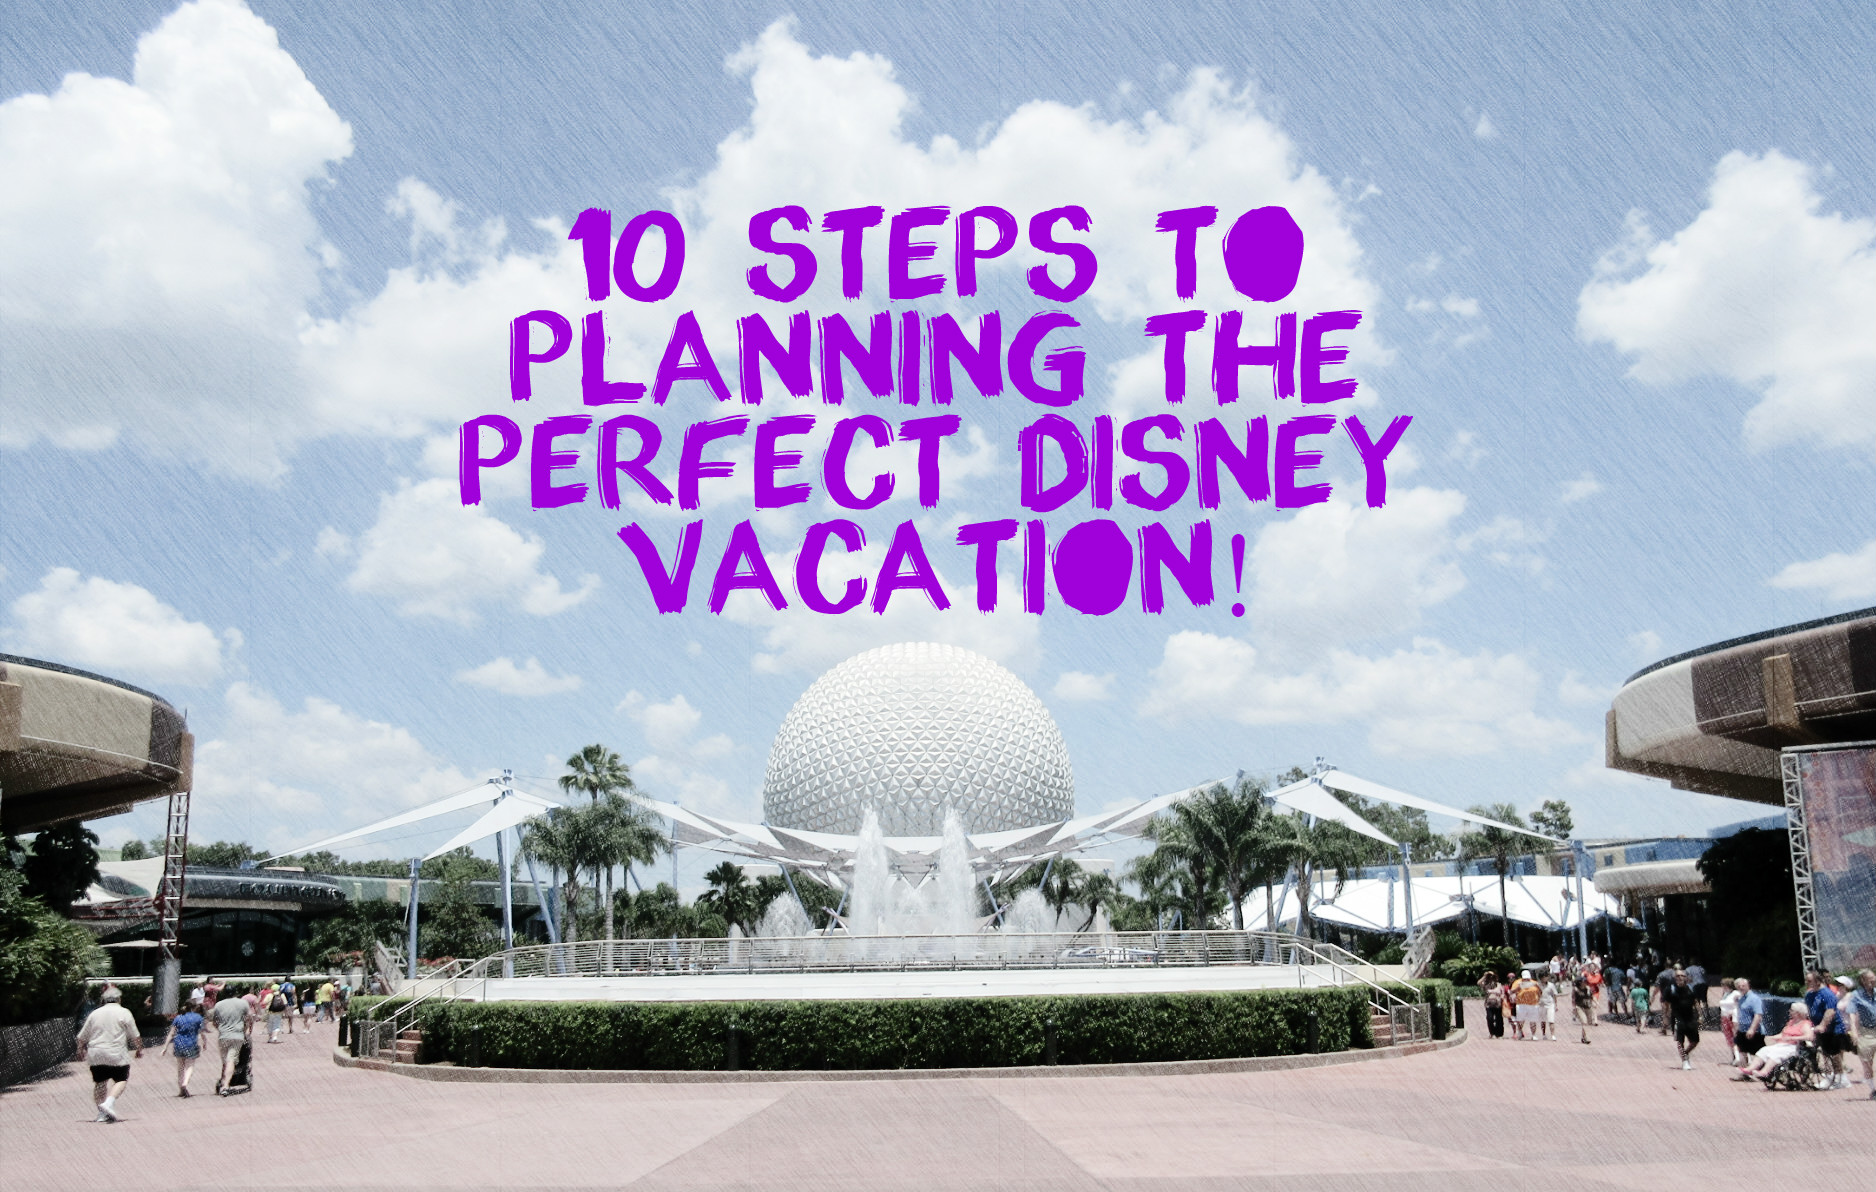 10 Steps To Planning the Perfect Disney Vacation